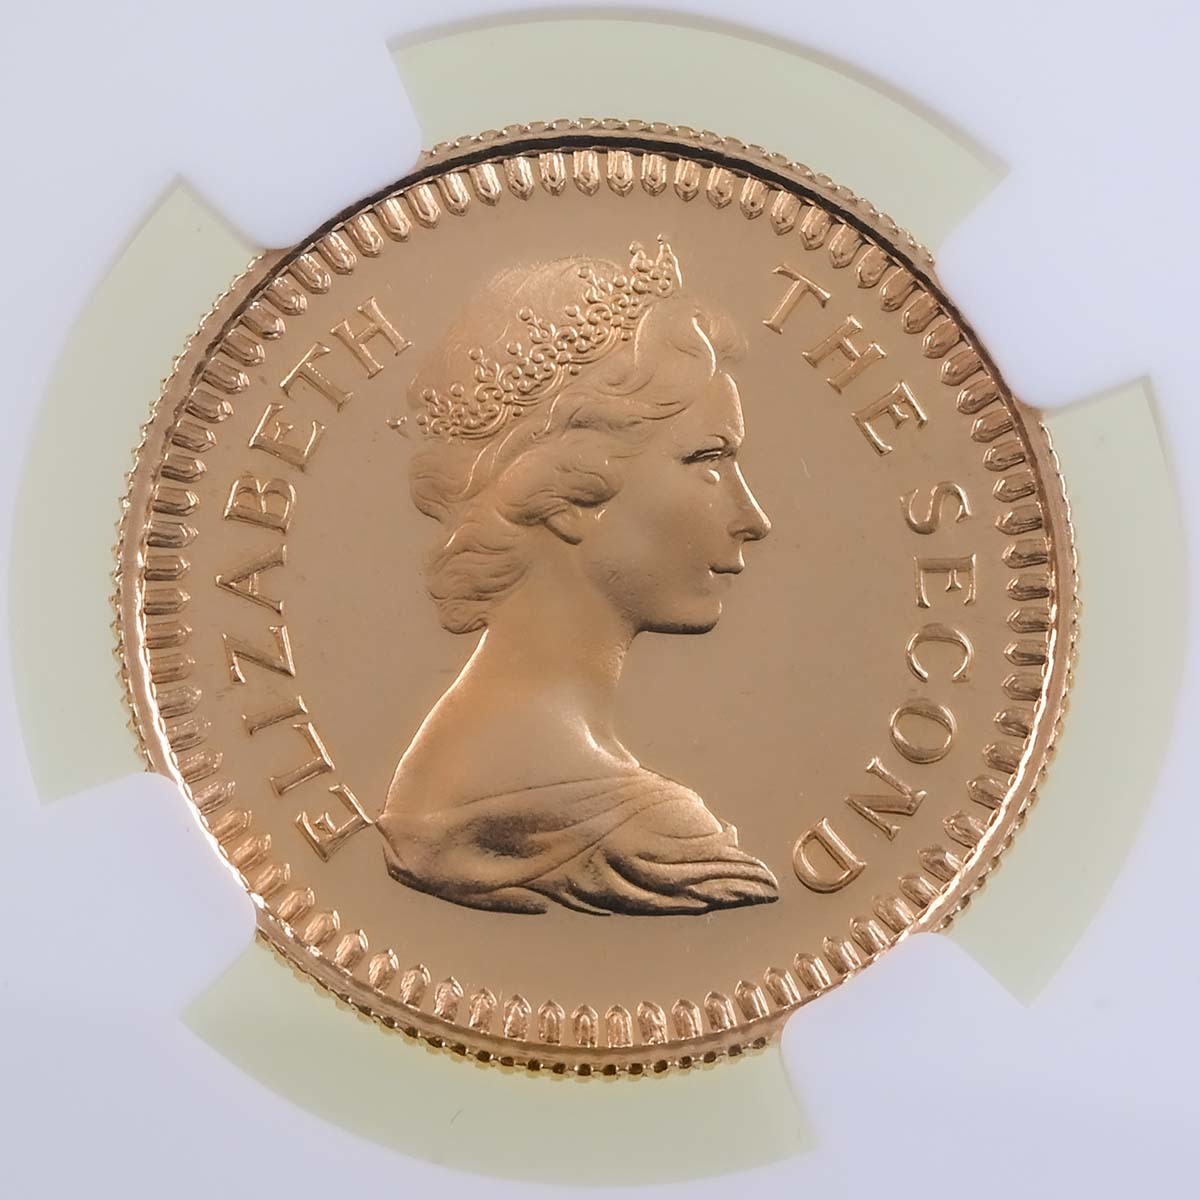 1966 Rhodesia One Pound Gold Proof Coin NGC Graded PF 67 Cameo Obverse